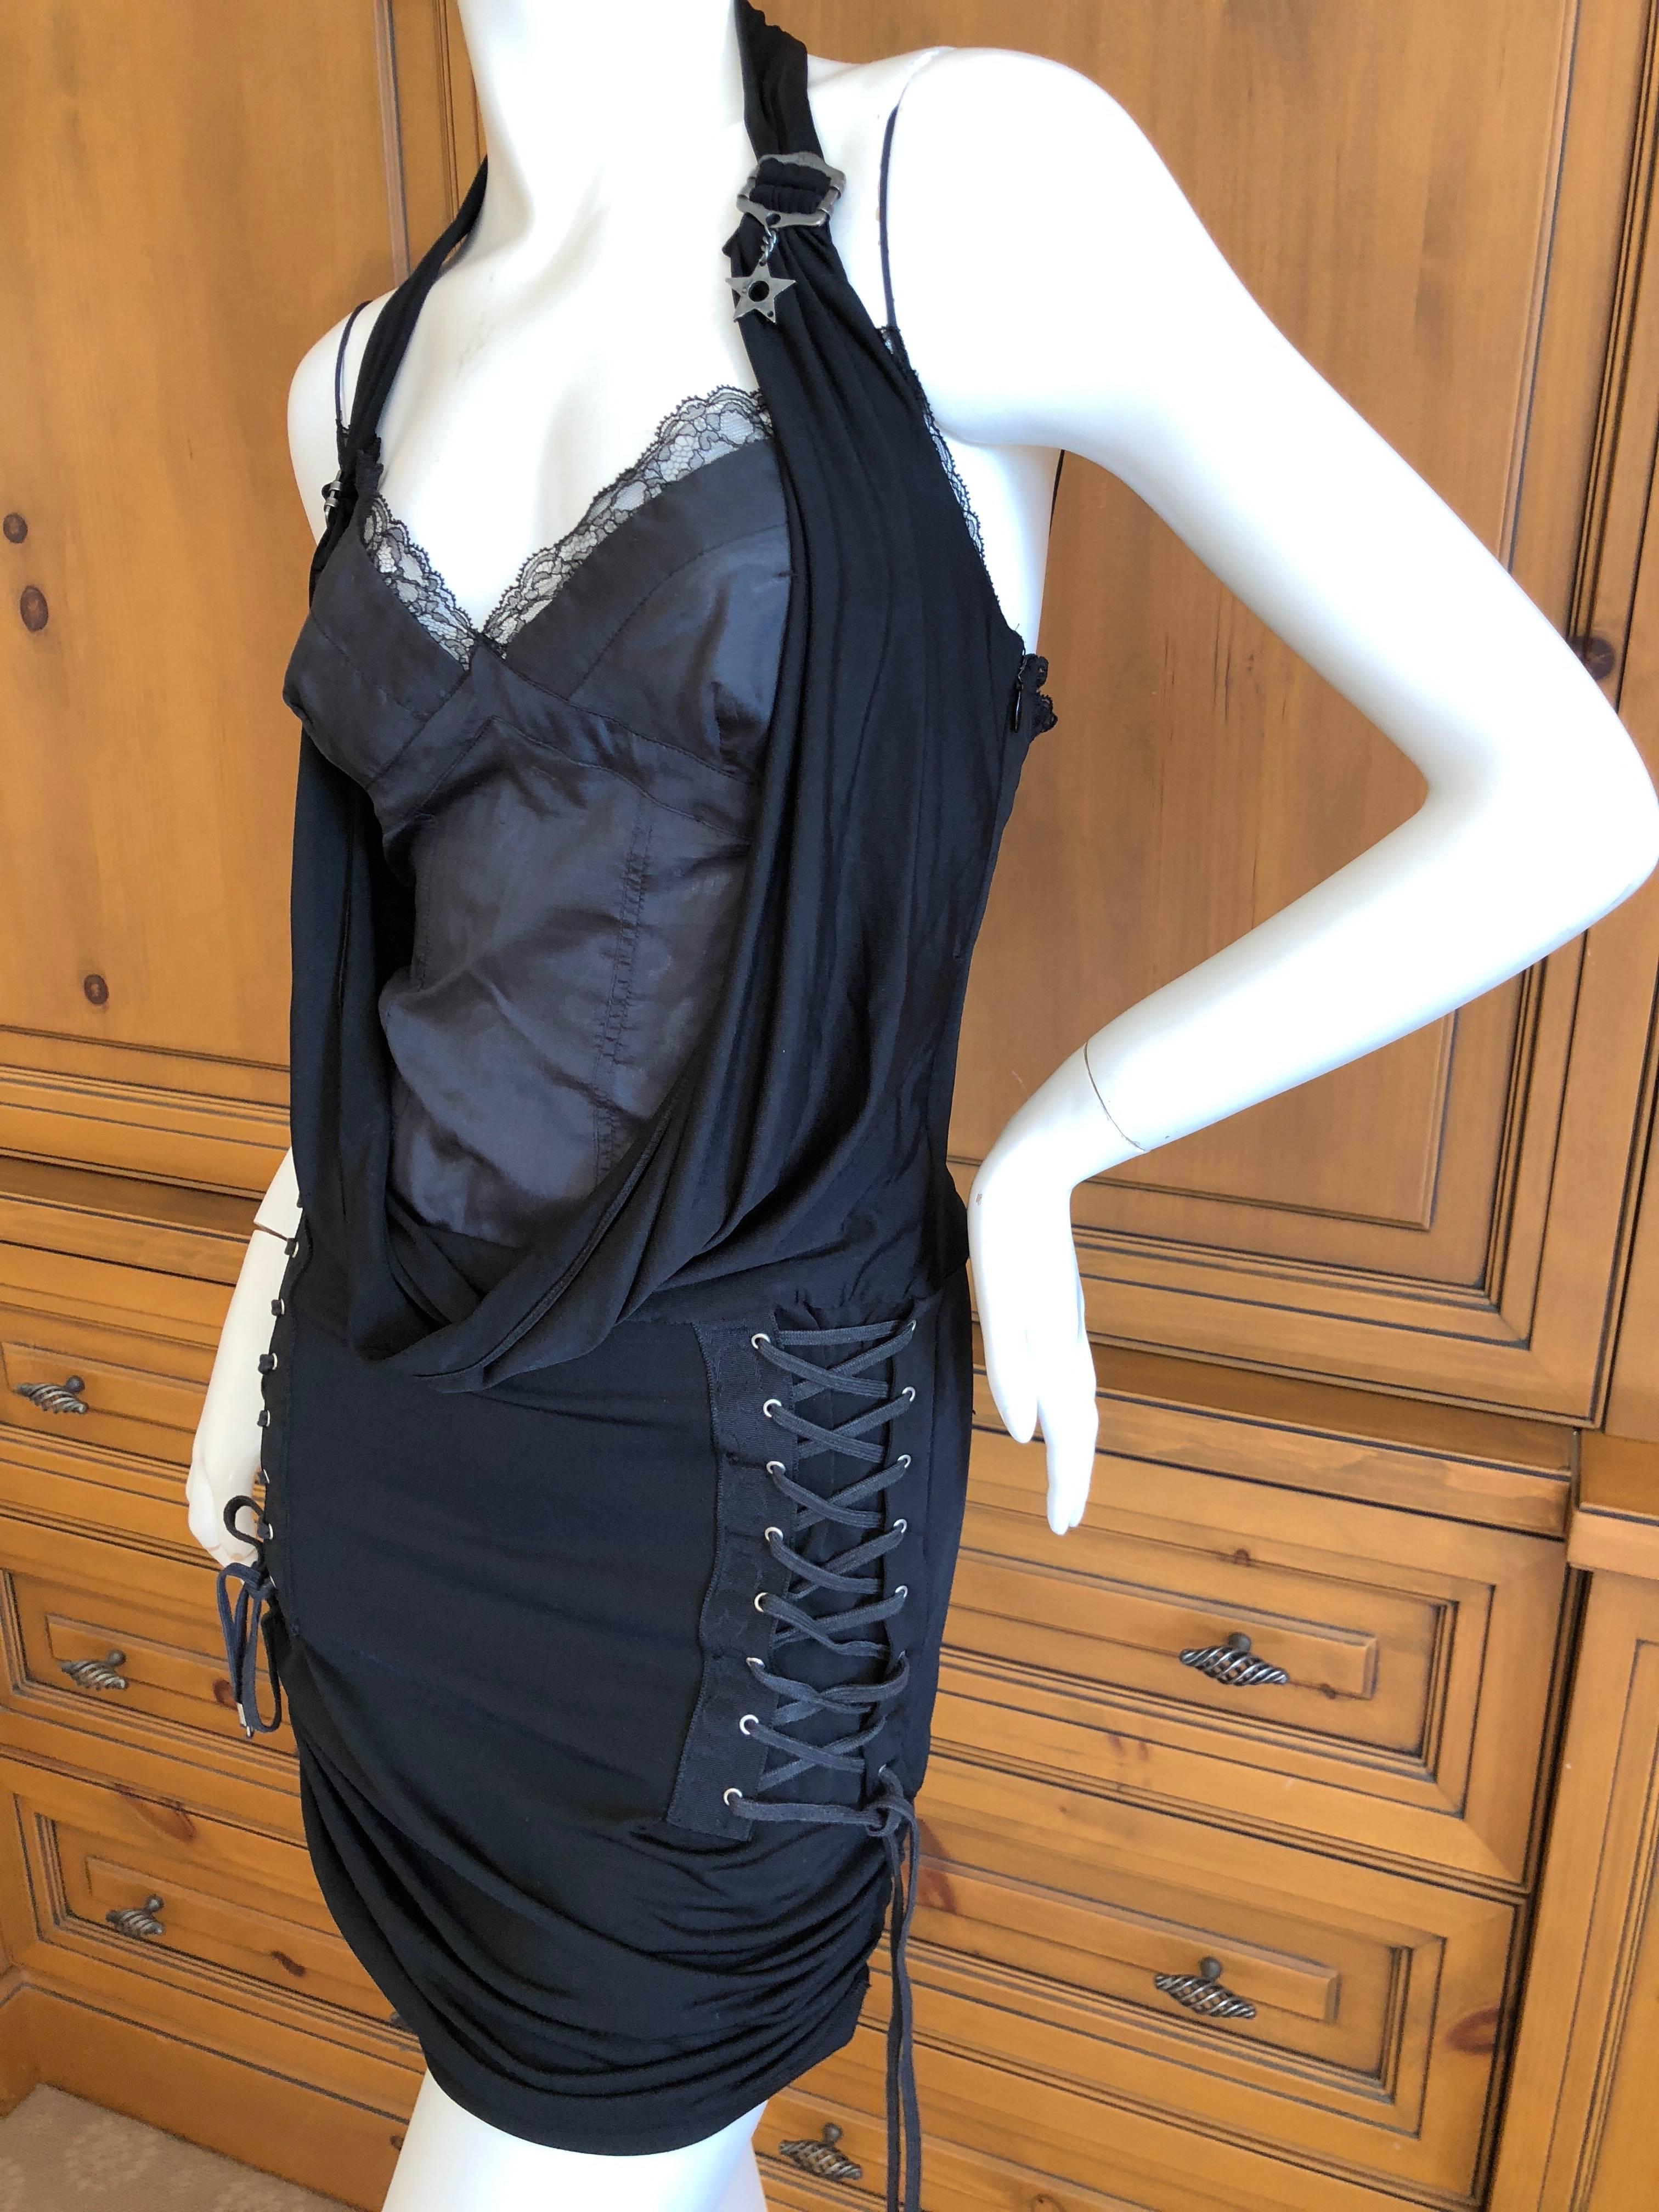 Christian Dior by John Galliano Lingerie Inspired Corset Laced Cocktail Dress.
Army Green, this is so sexy.
Size 38
Bust 34